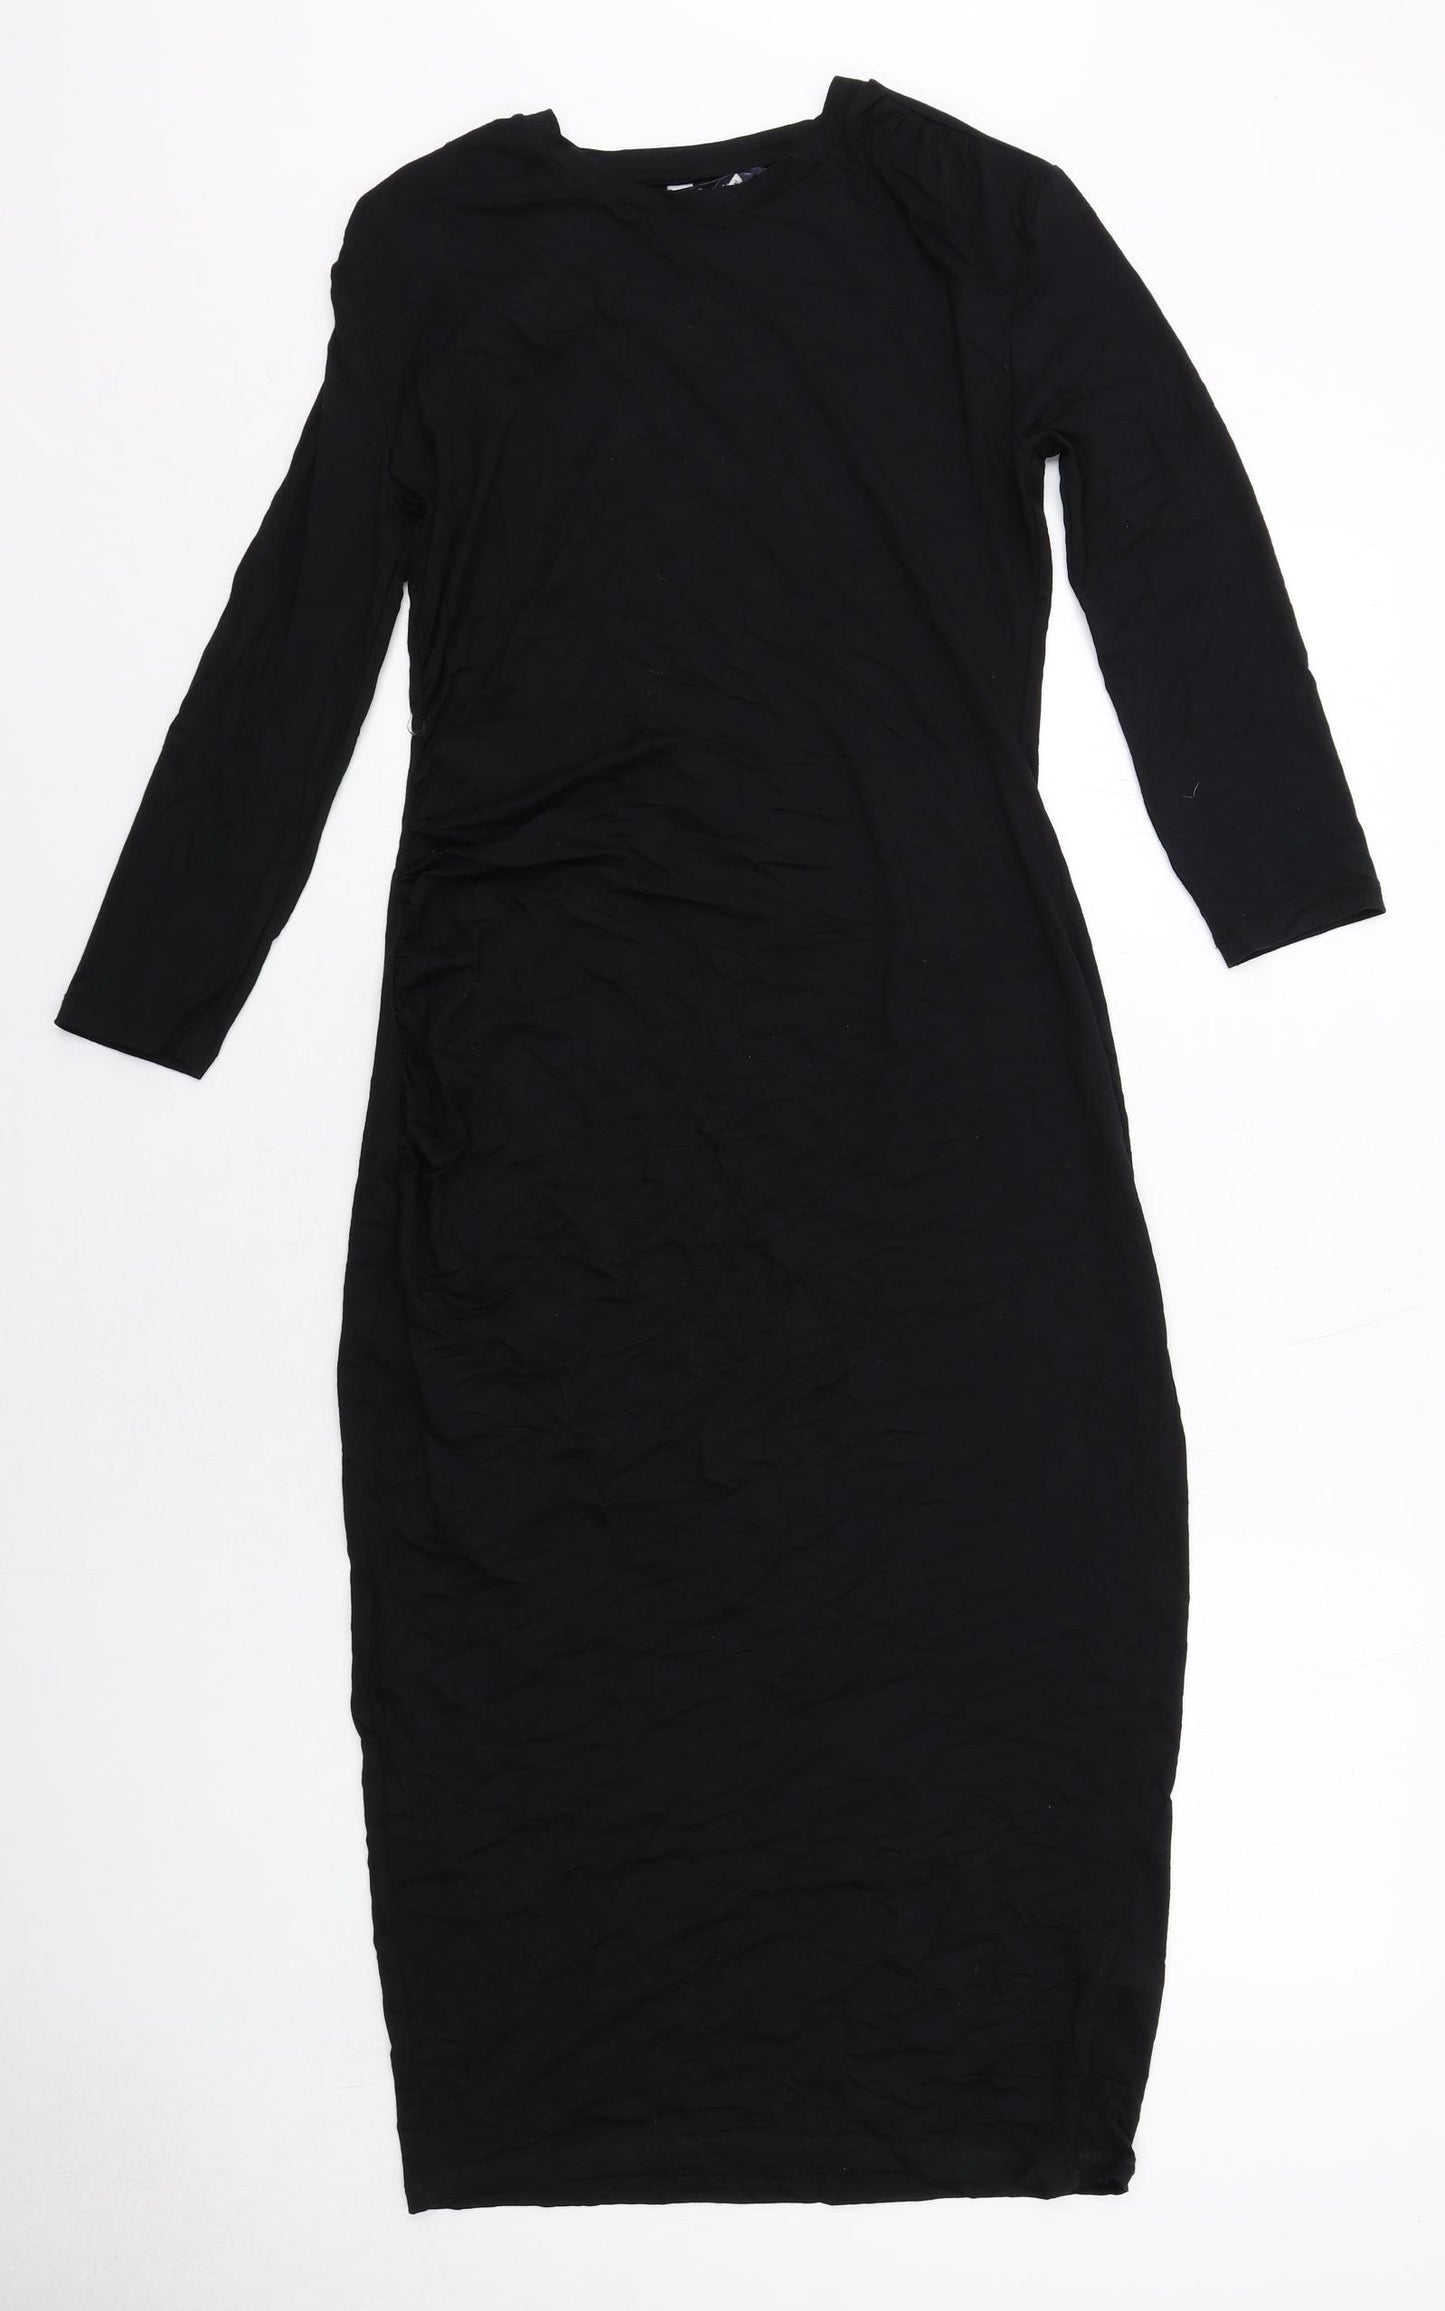 Marks and Spencer Womens Black Viscose T-Shirt Dress Size 10 Crew Neck Pullover